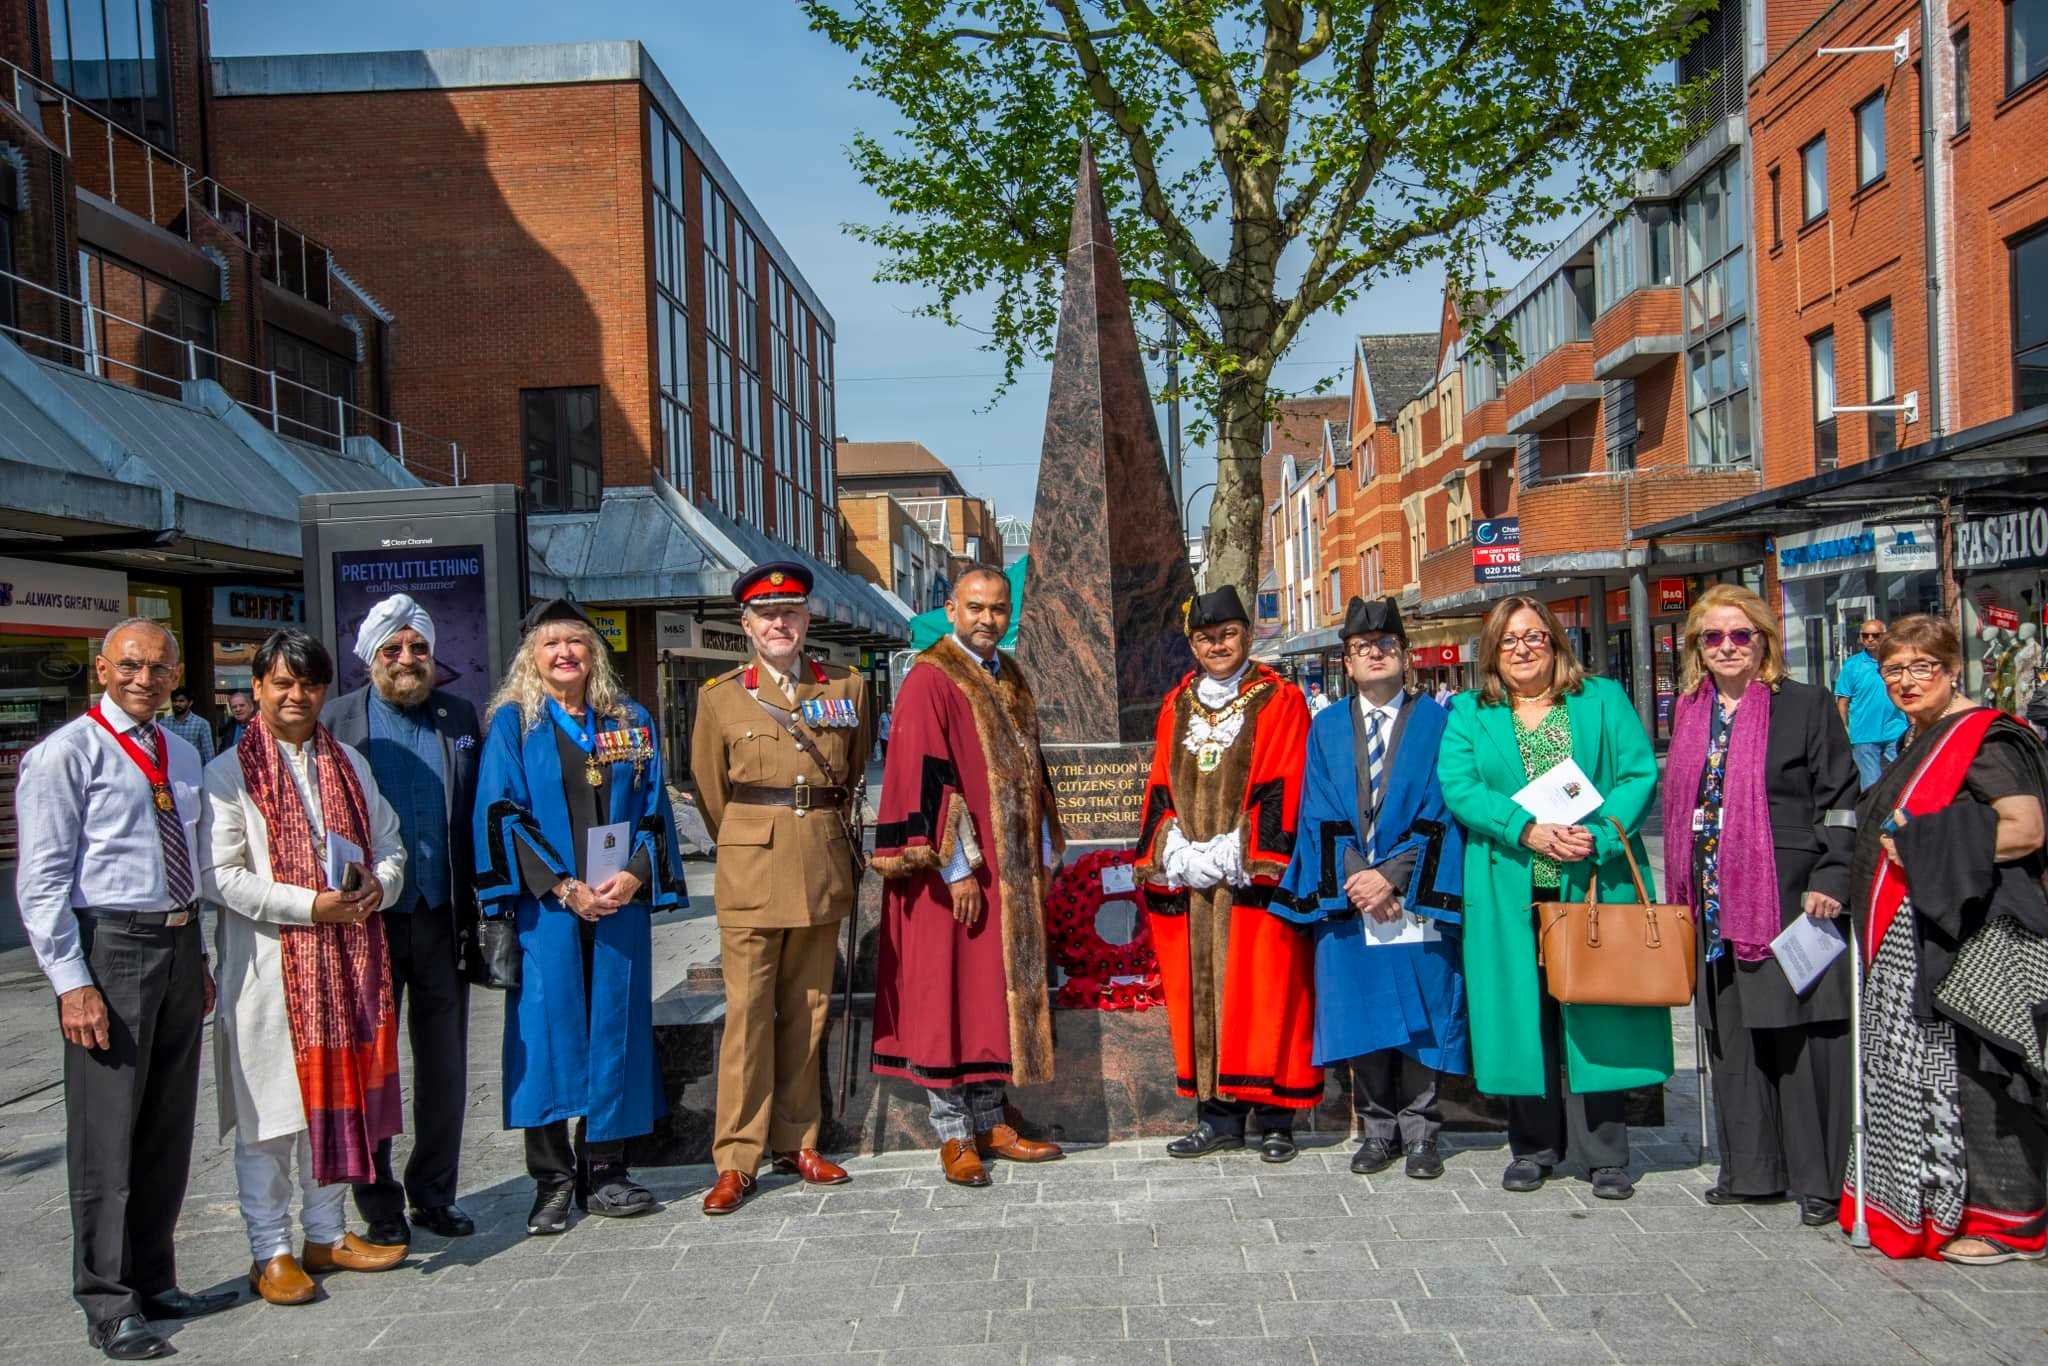 Multi faith leaders, Councillors, The Mayor of Harrow and Leader of The Borough of Harrow take a picture by the war memorial in Harrow Town Centre